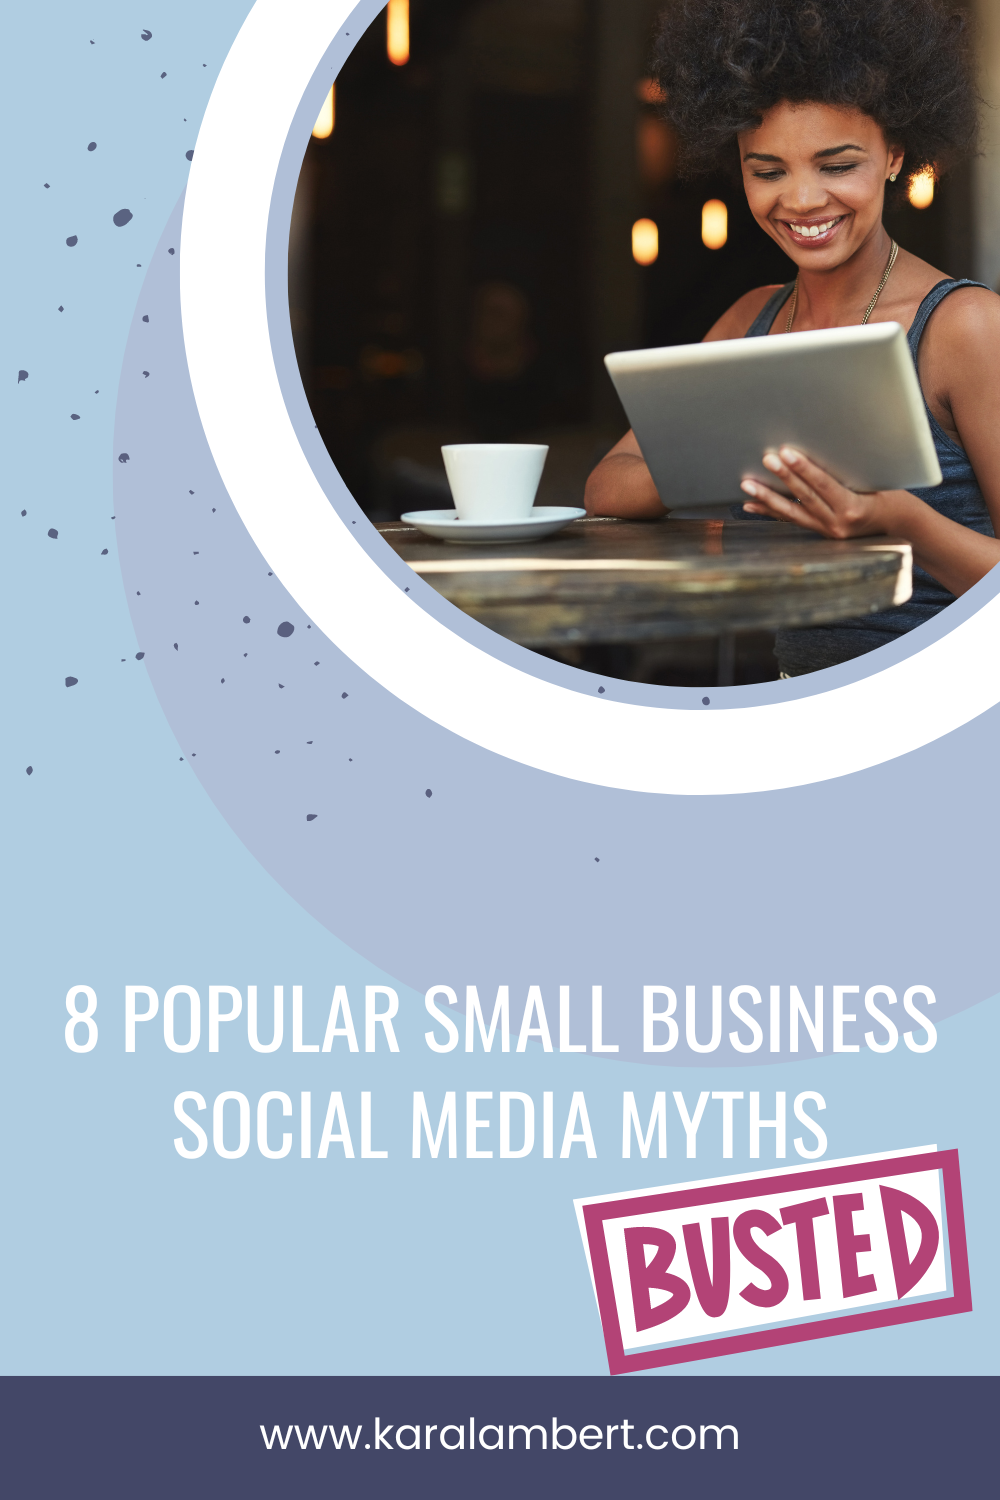 8 popular small business social media beliefs busted